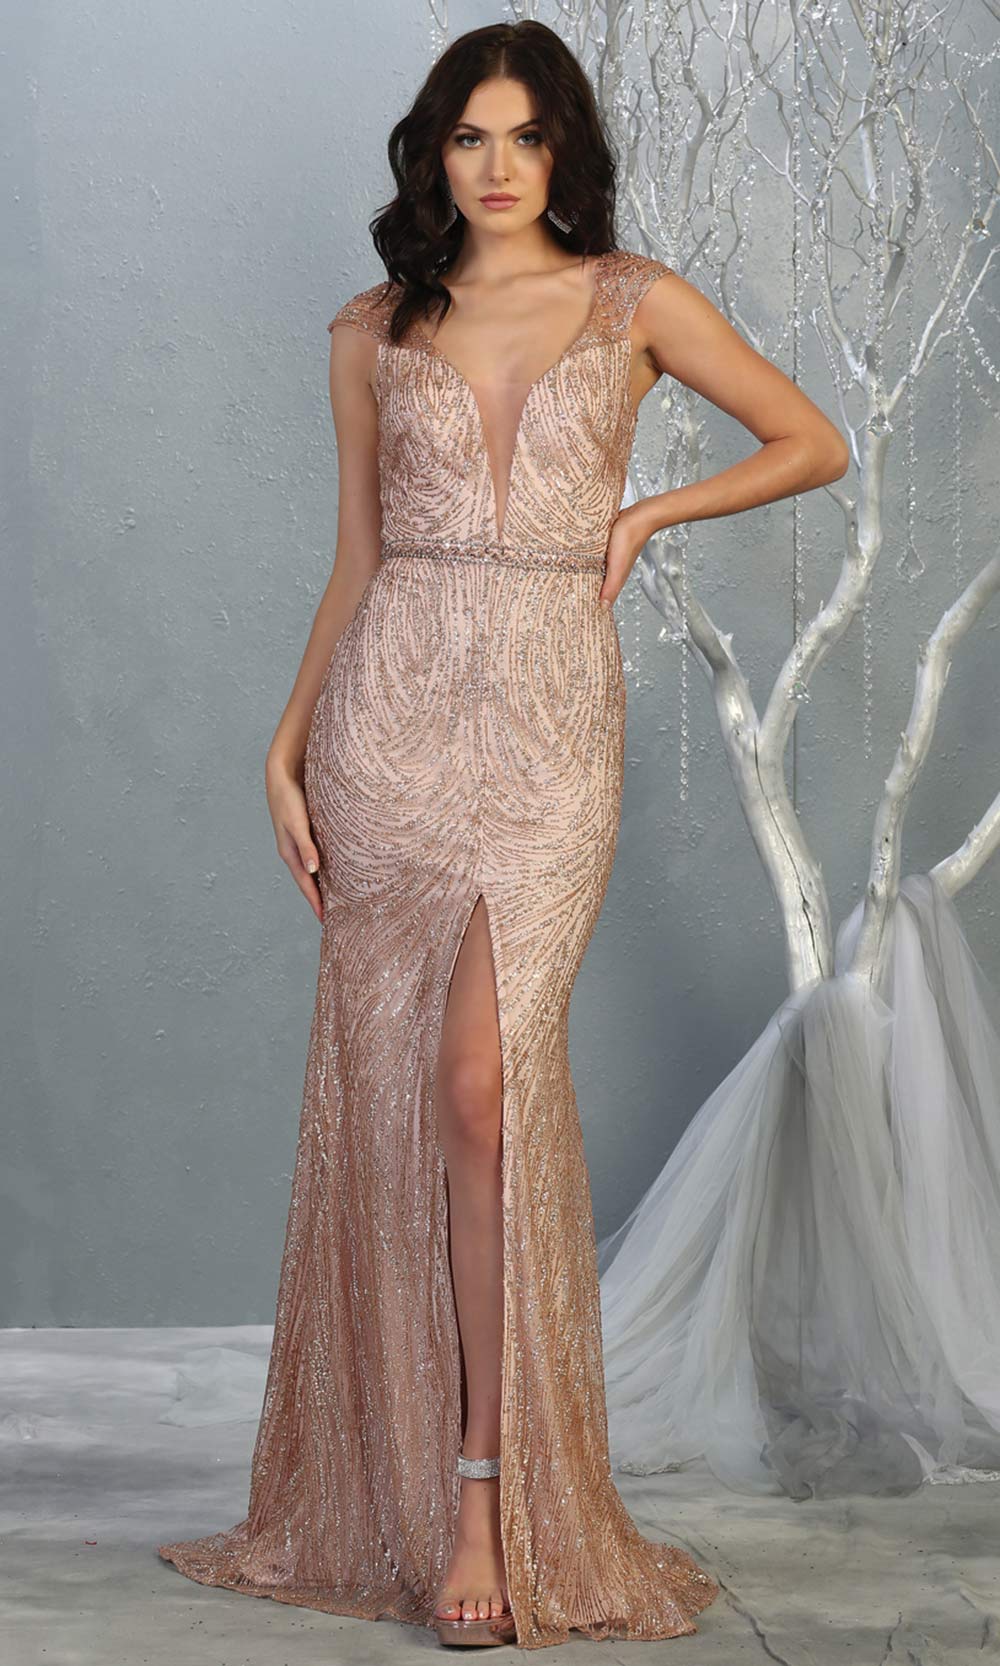 Mayqueen RQ7812 long rose gold v neck sexy fitted sequin dress w/cap sleeves. Full length light pink gown is perfect for  enagagement/e-shoot dress, formal wedding guest, indowestern gown, evening party dress, prom, bridesmaid. Plus sizes avail.jpg